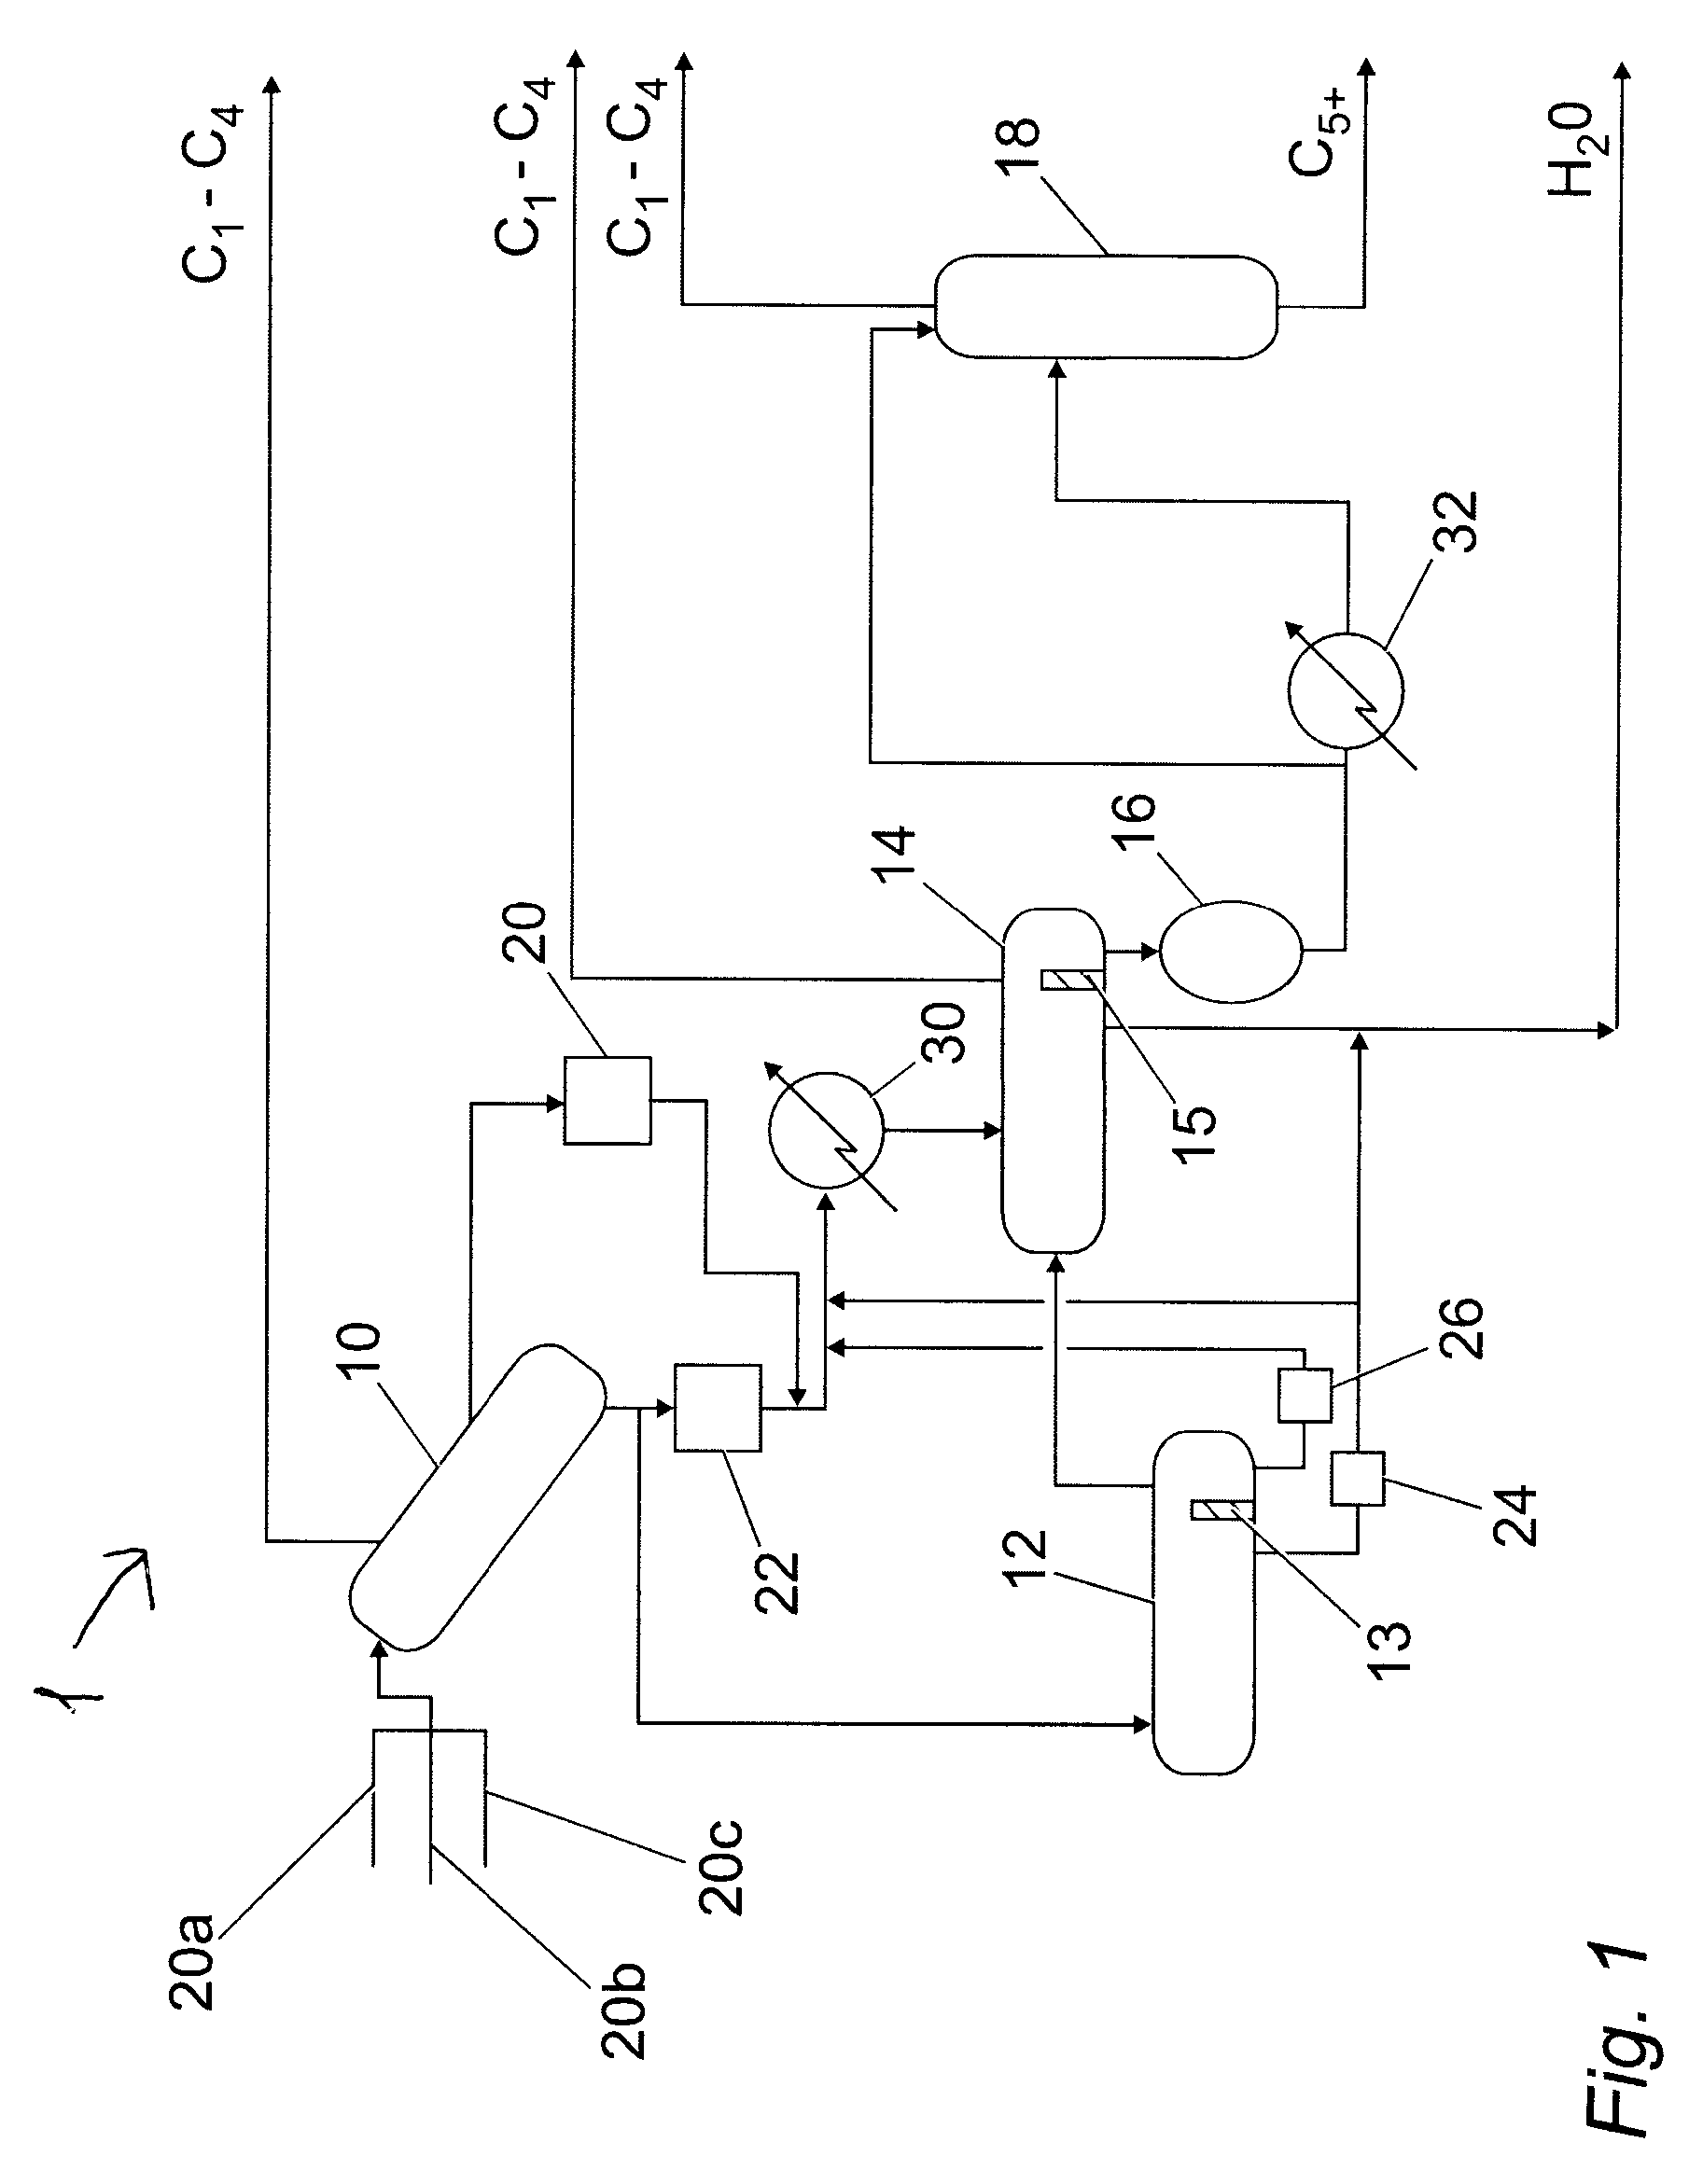 Method for receiving fluid from a natural gas pipeline